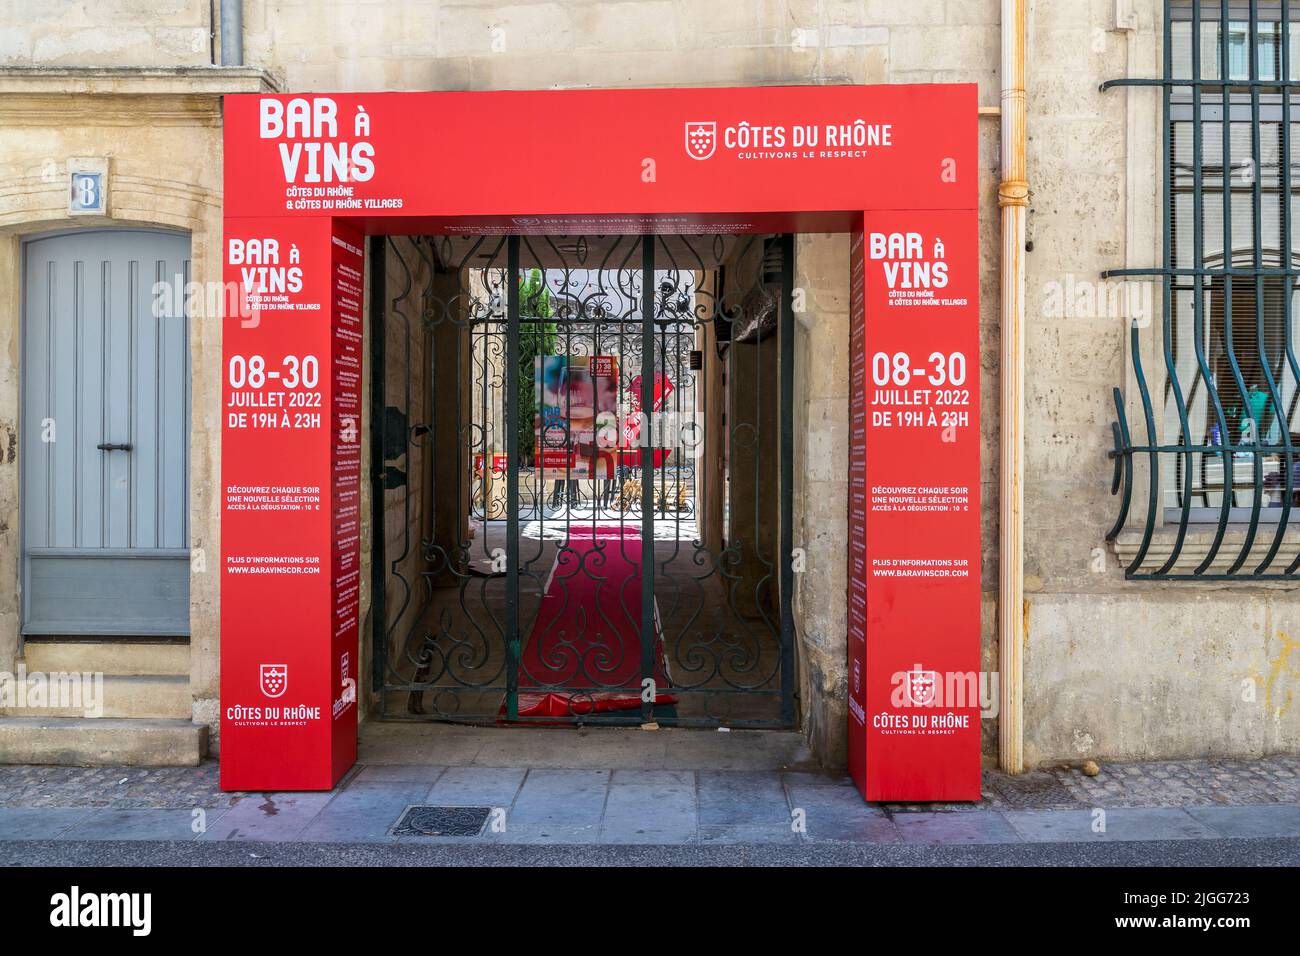 A striking red frame on an old town house indicates this: For three weeks, Avignon hosts daily Côtes du Rhône wine tastings. Avignon, France Stock Photo